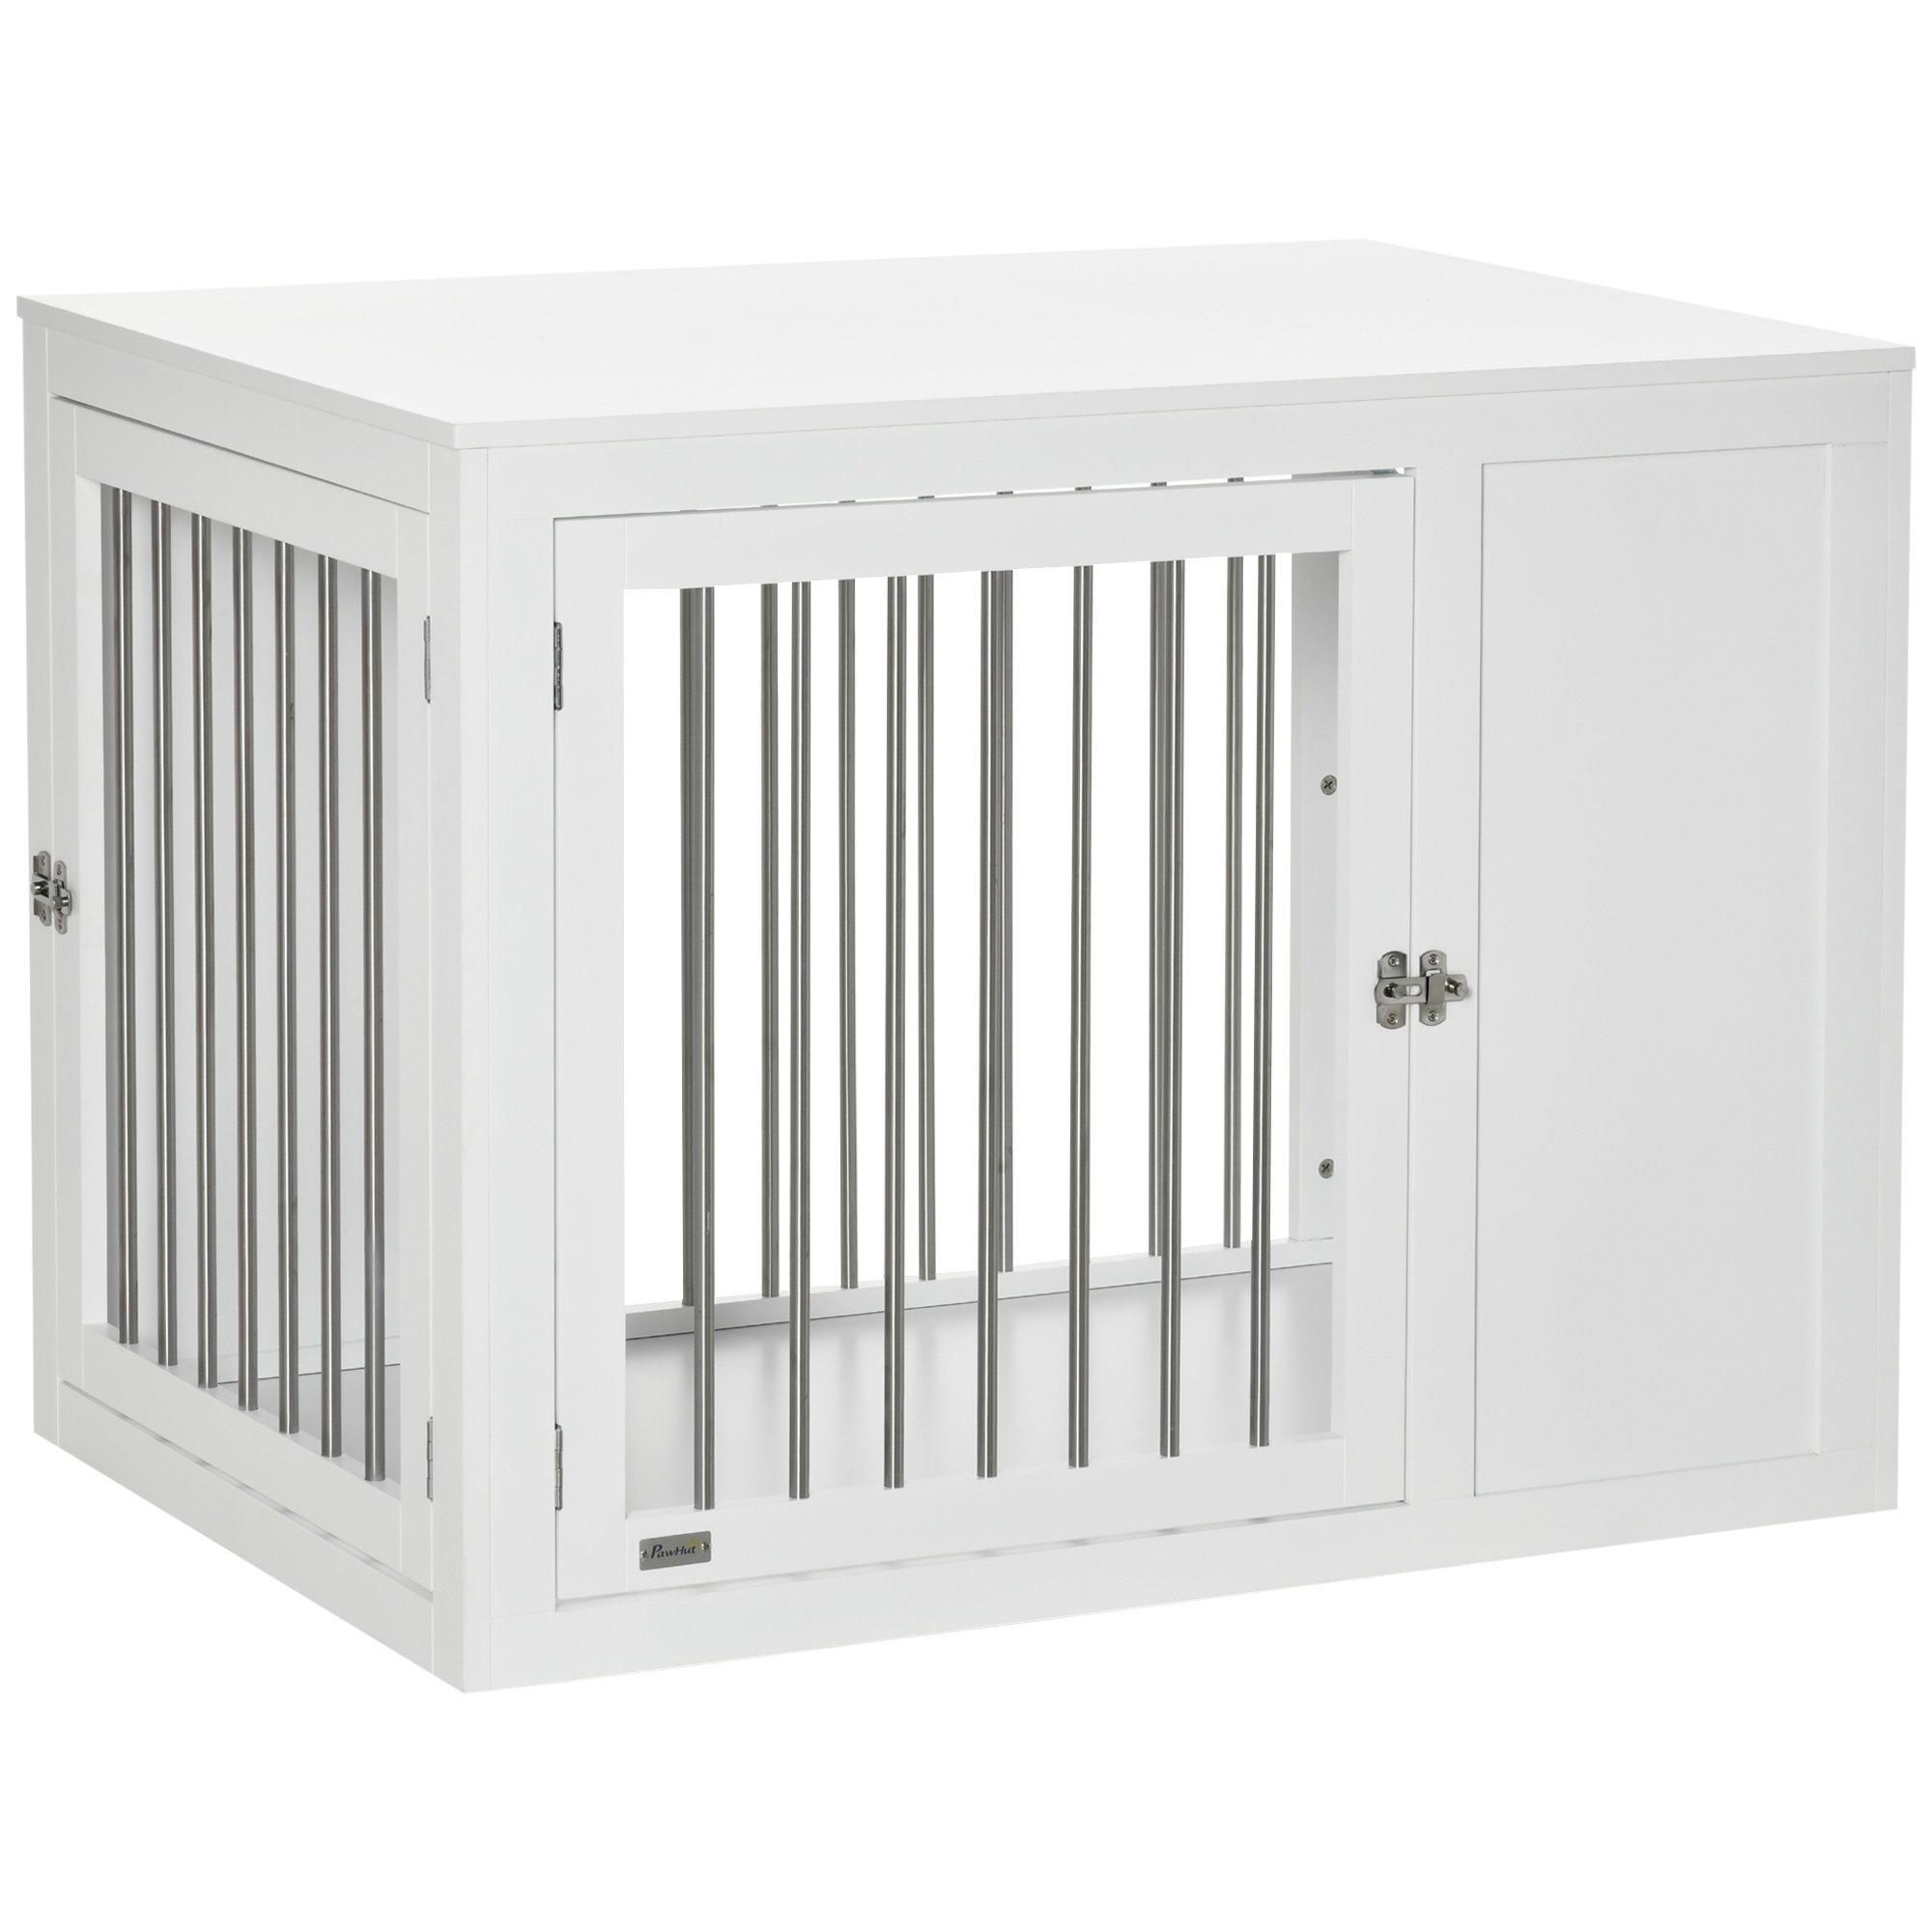 PawHut Dog Crate Pet Cage End Table with Two Doors for Medium Large Dog, White